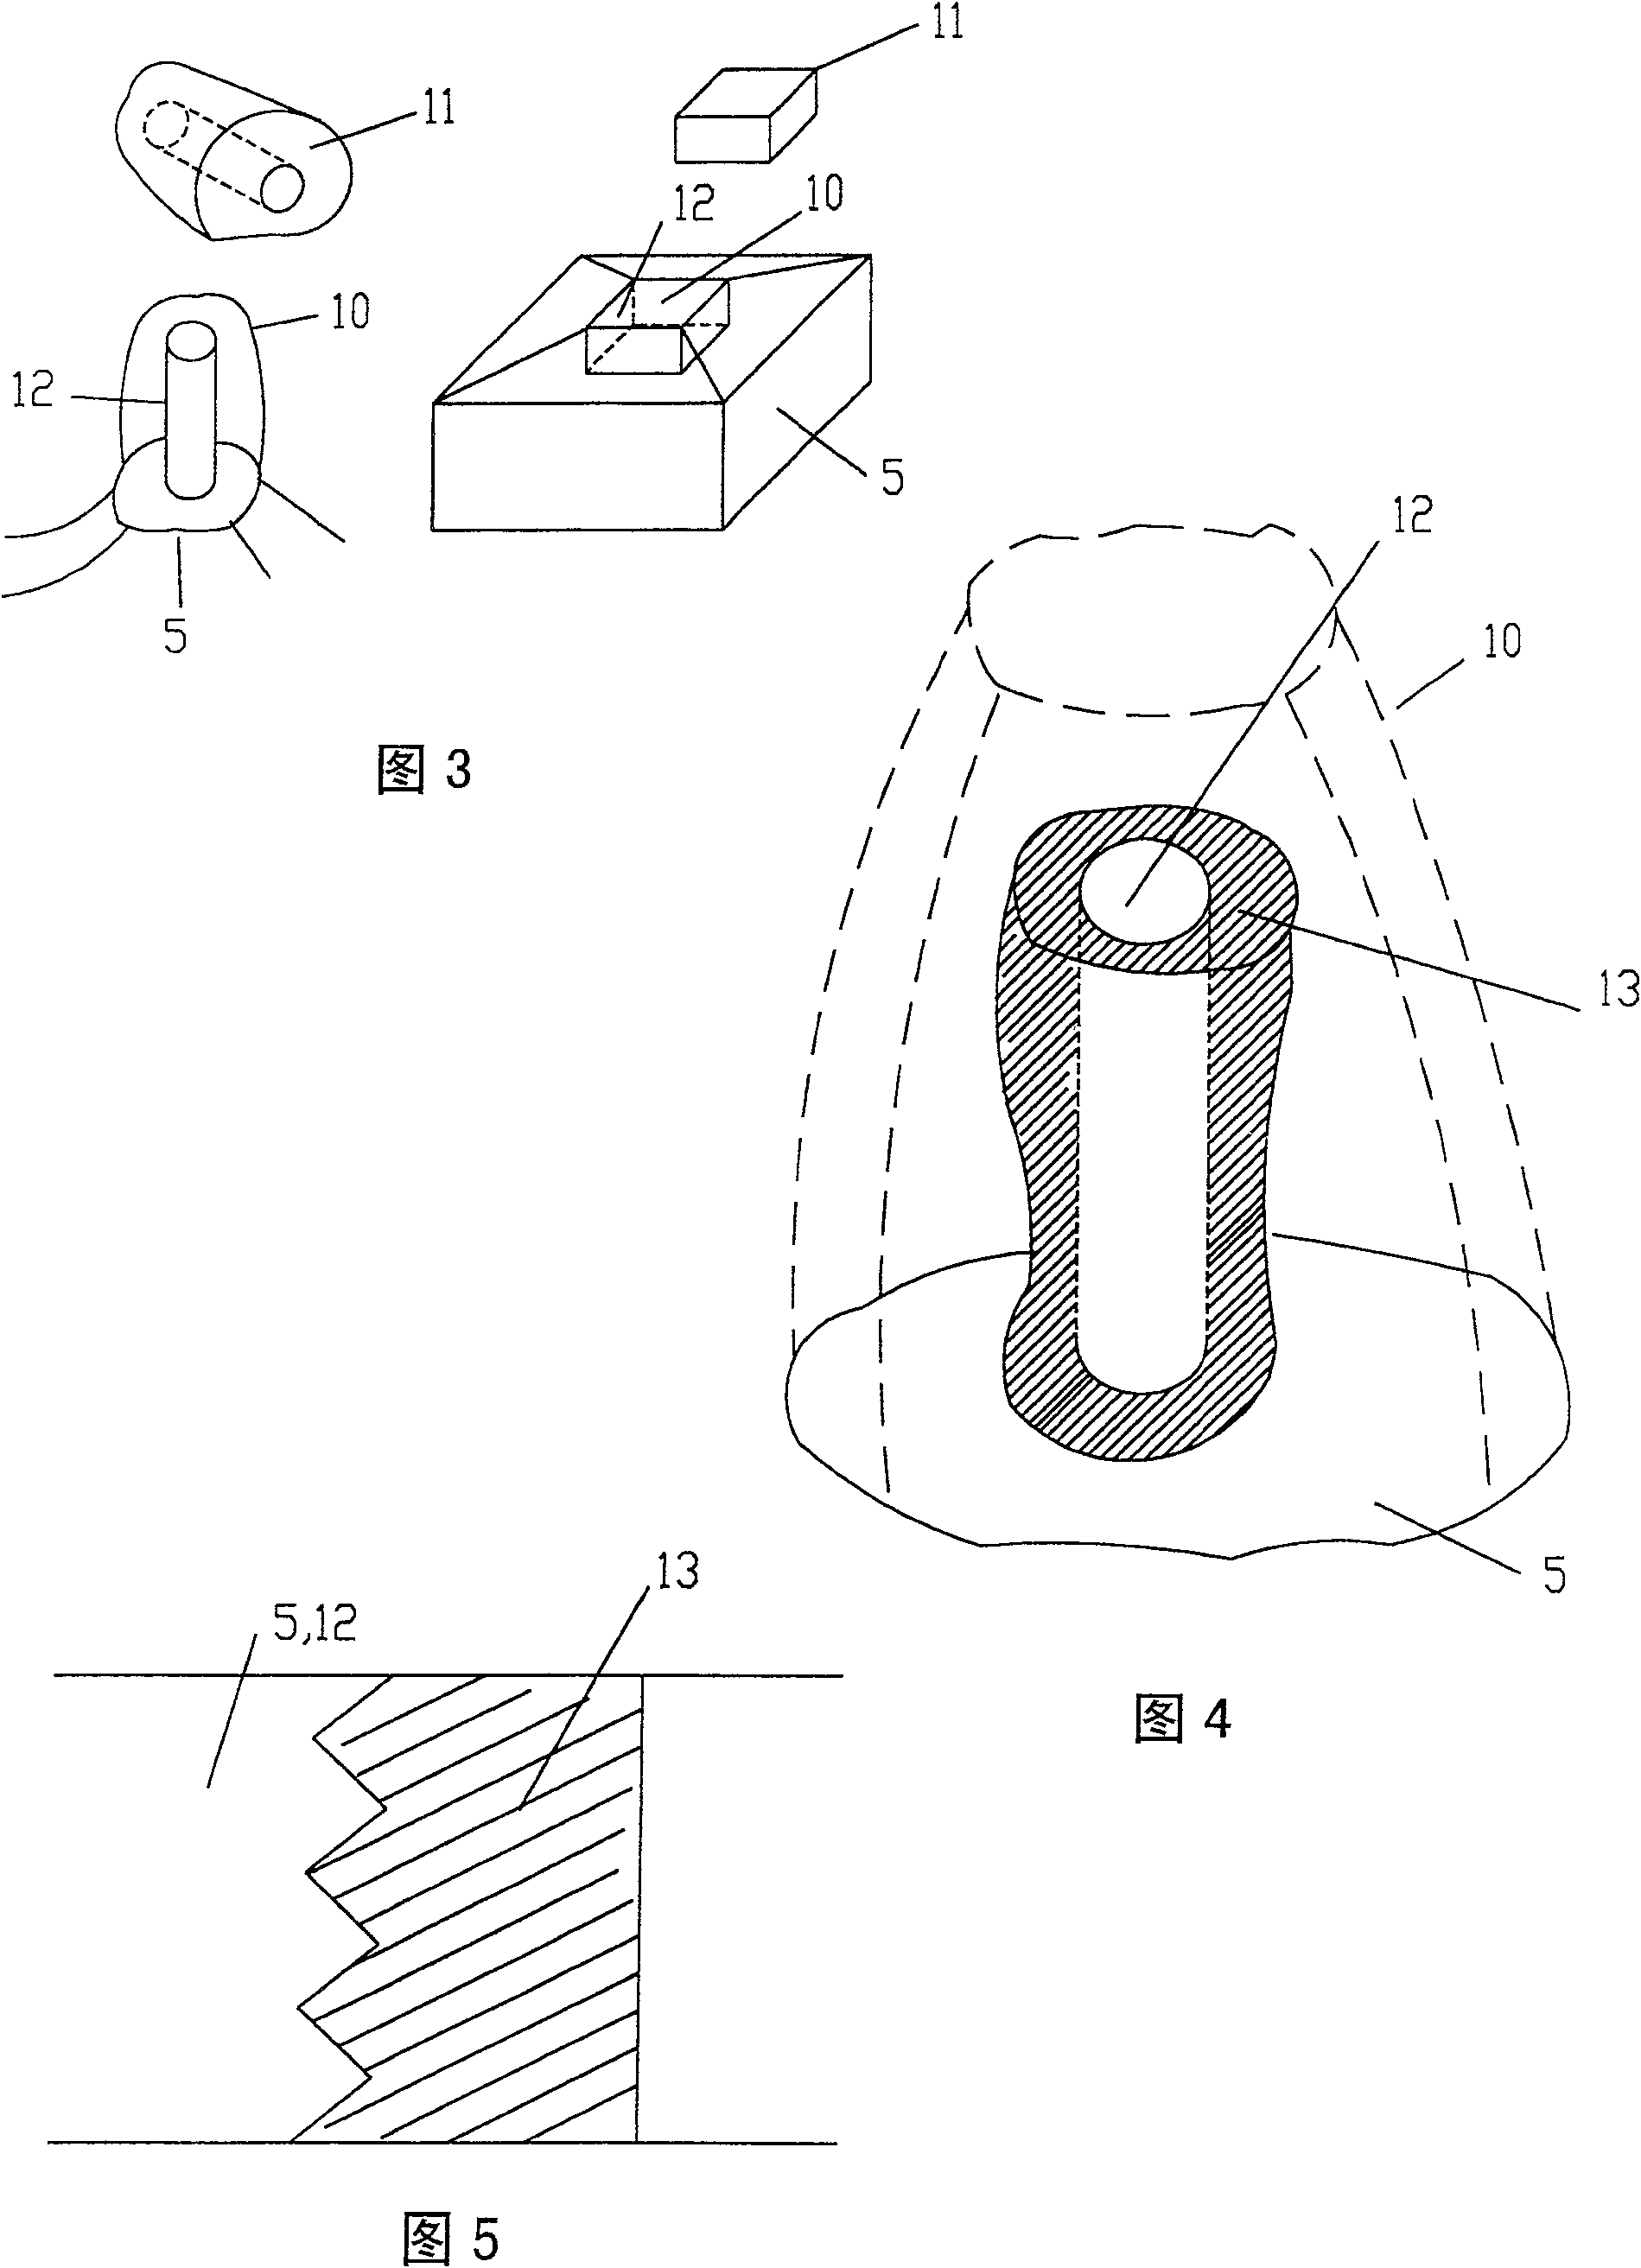 Method and device system for removing material or for working material